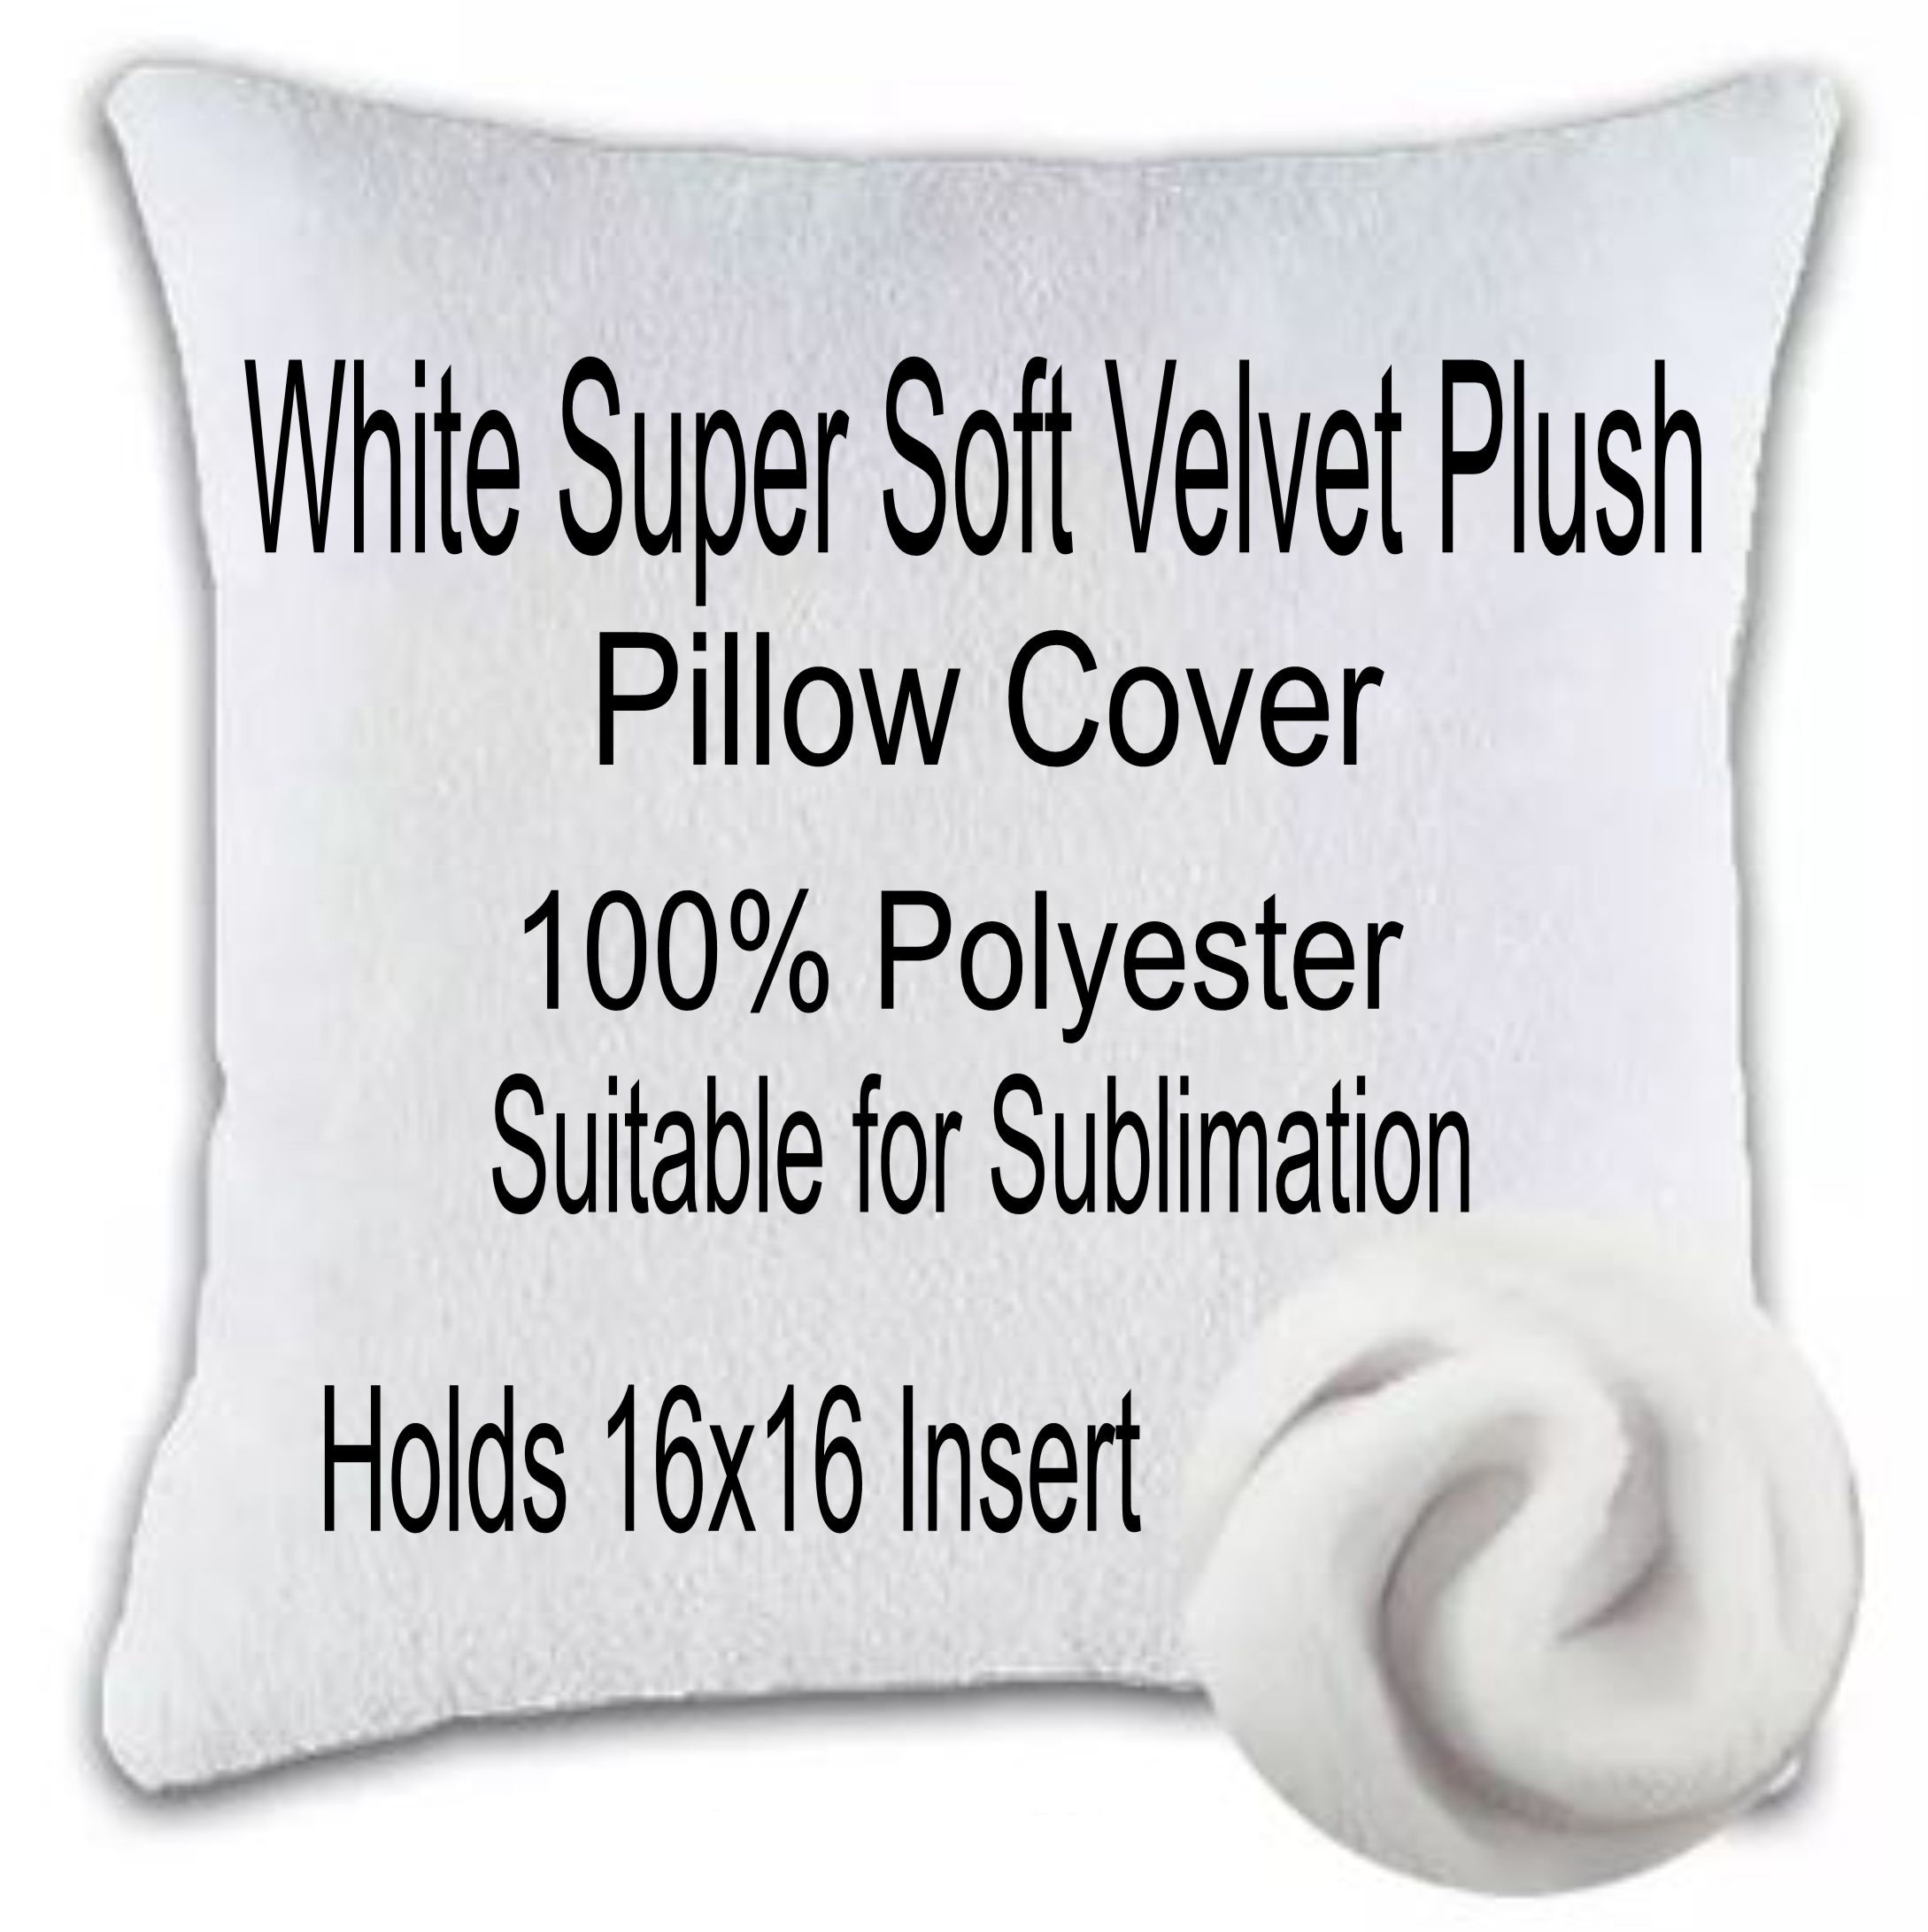 set of 2) 16x16 double sided 4 panel Sublimation pillow covers